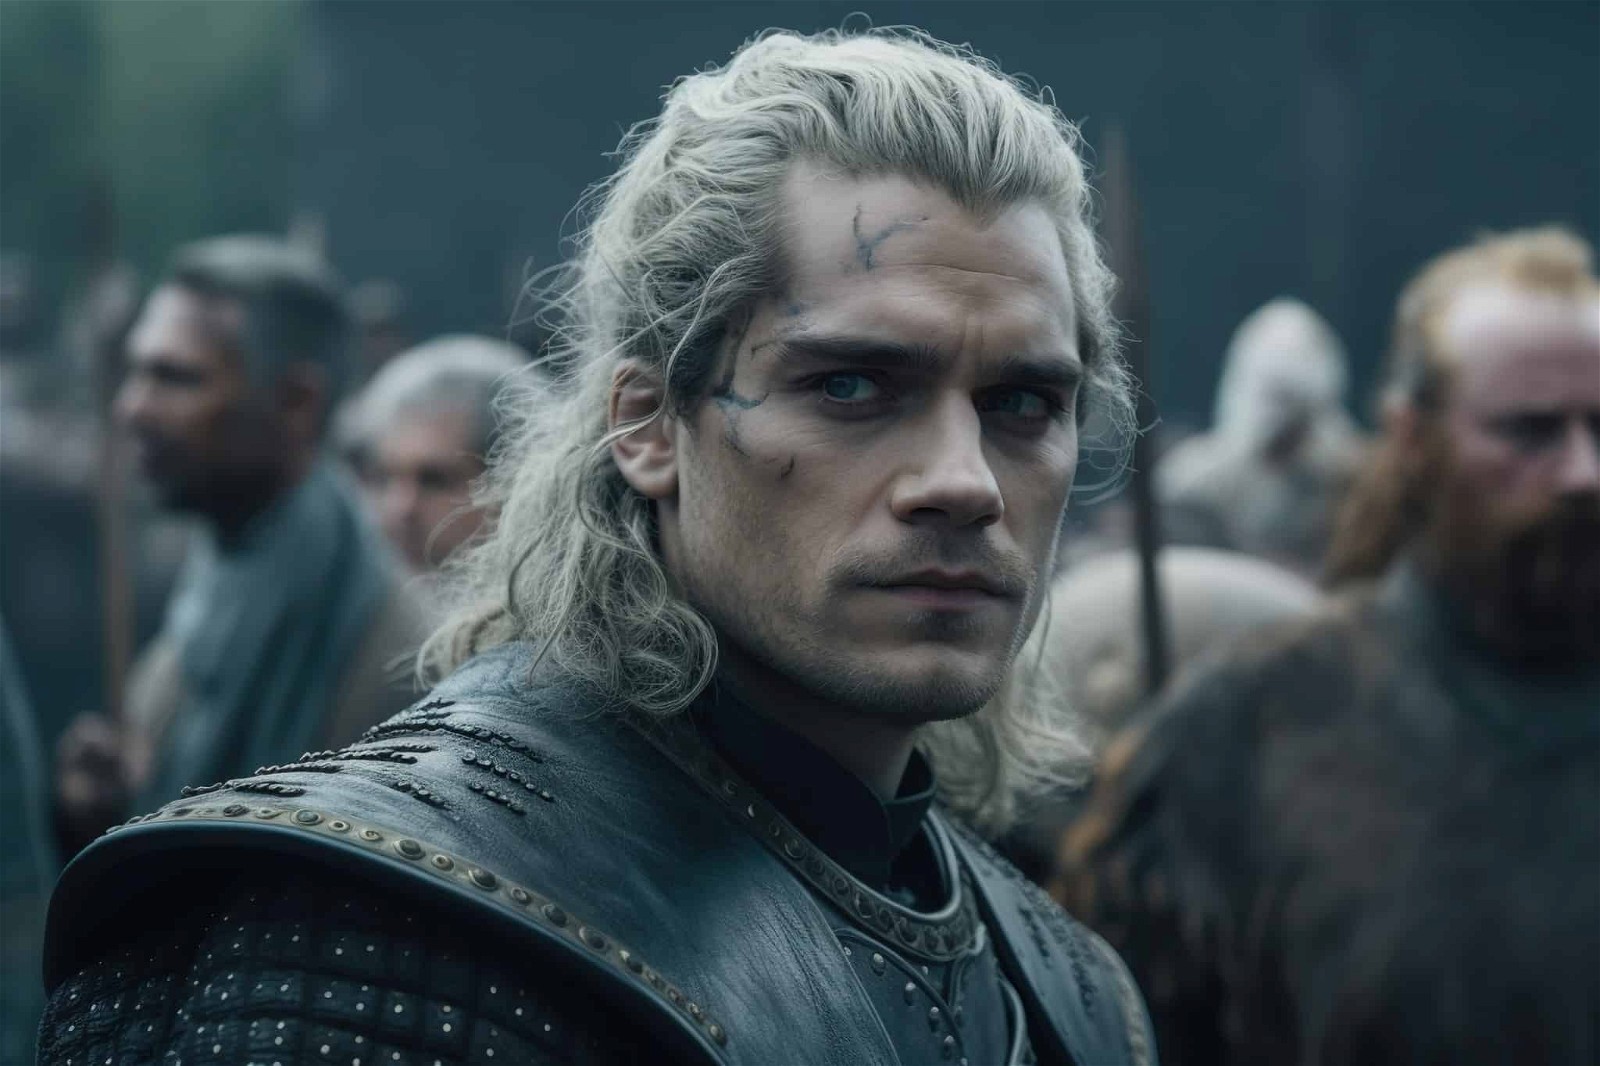 Henry Cavill in The Witcher